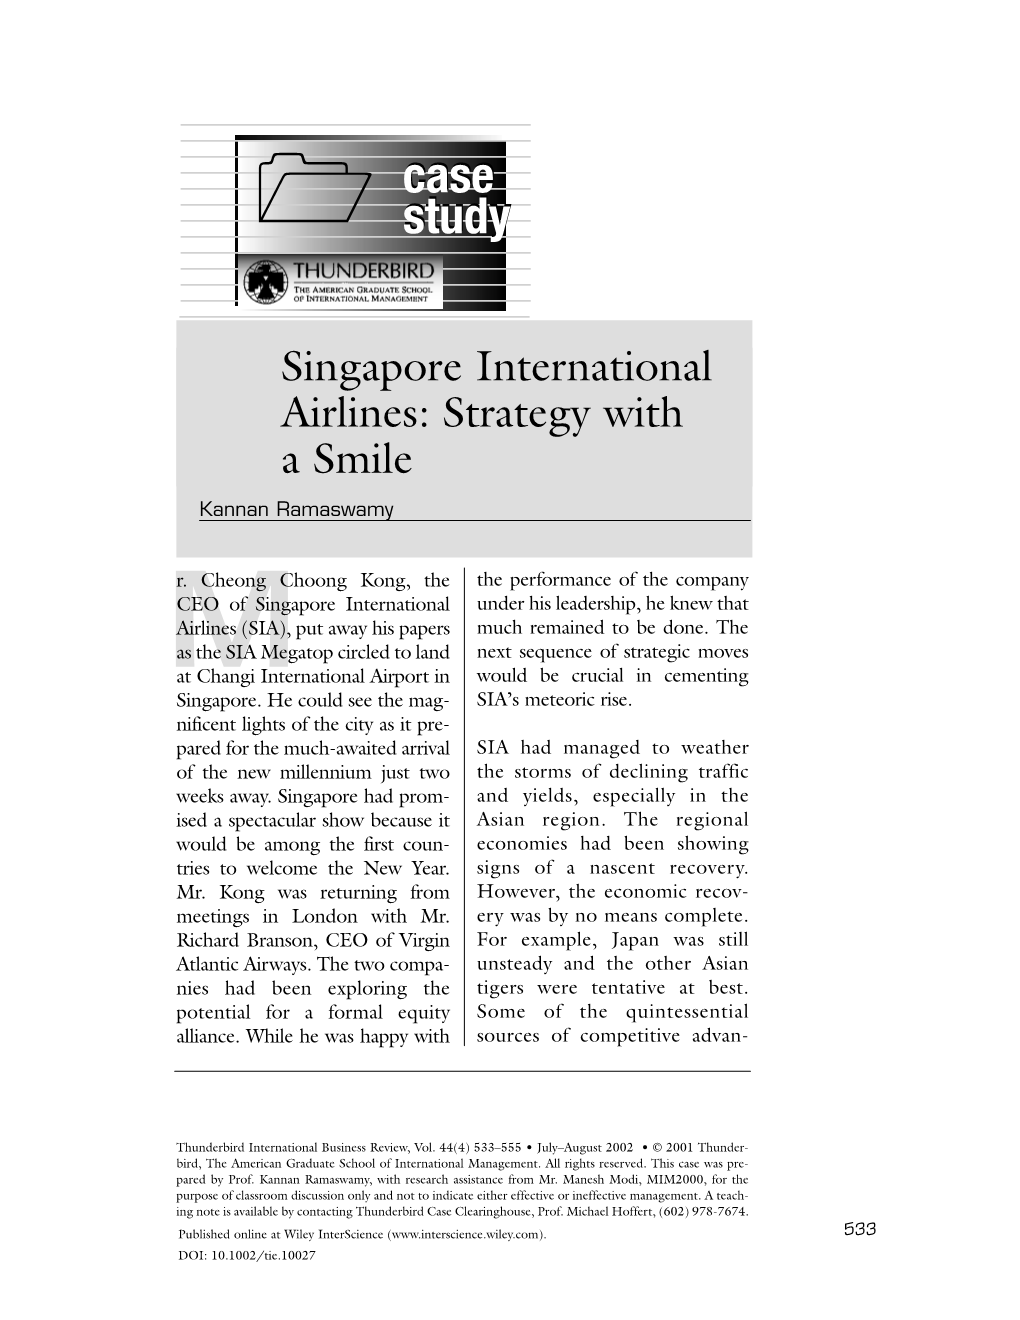 Singapore International Airlines: Strategy with a Smile Kannan Ramaswamy